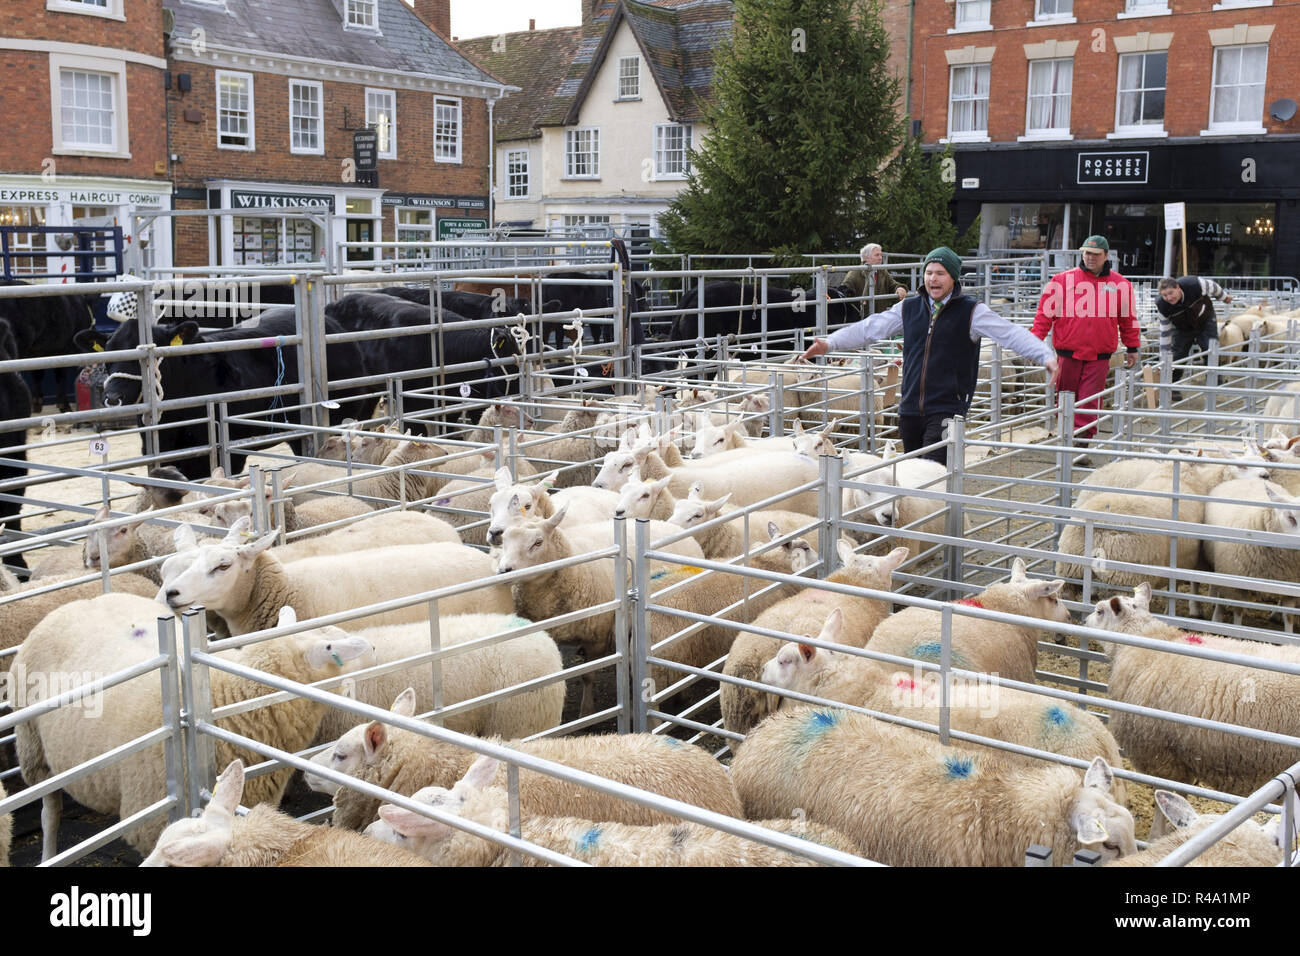 Winslow, UK - November 26, 2018. Sheep are herded toward away after being sold by auction at the Winslow Primestock Show. The show is an annual event held in the historic market town in Buckinghamshire. Credit: Paul Maguire/Alamy Live News Stock Photo